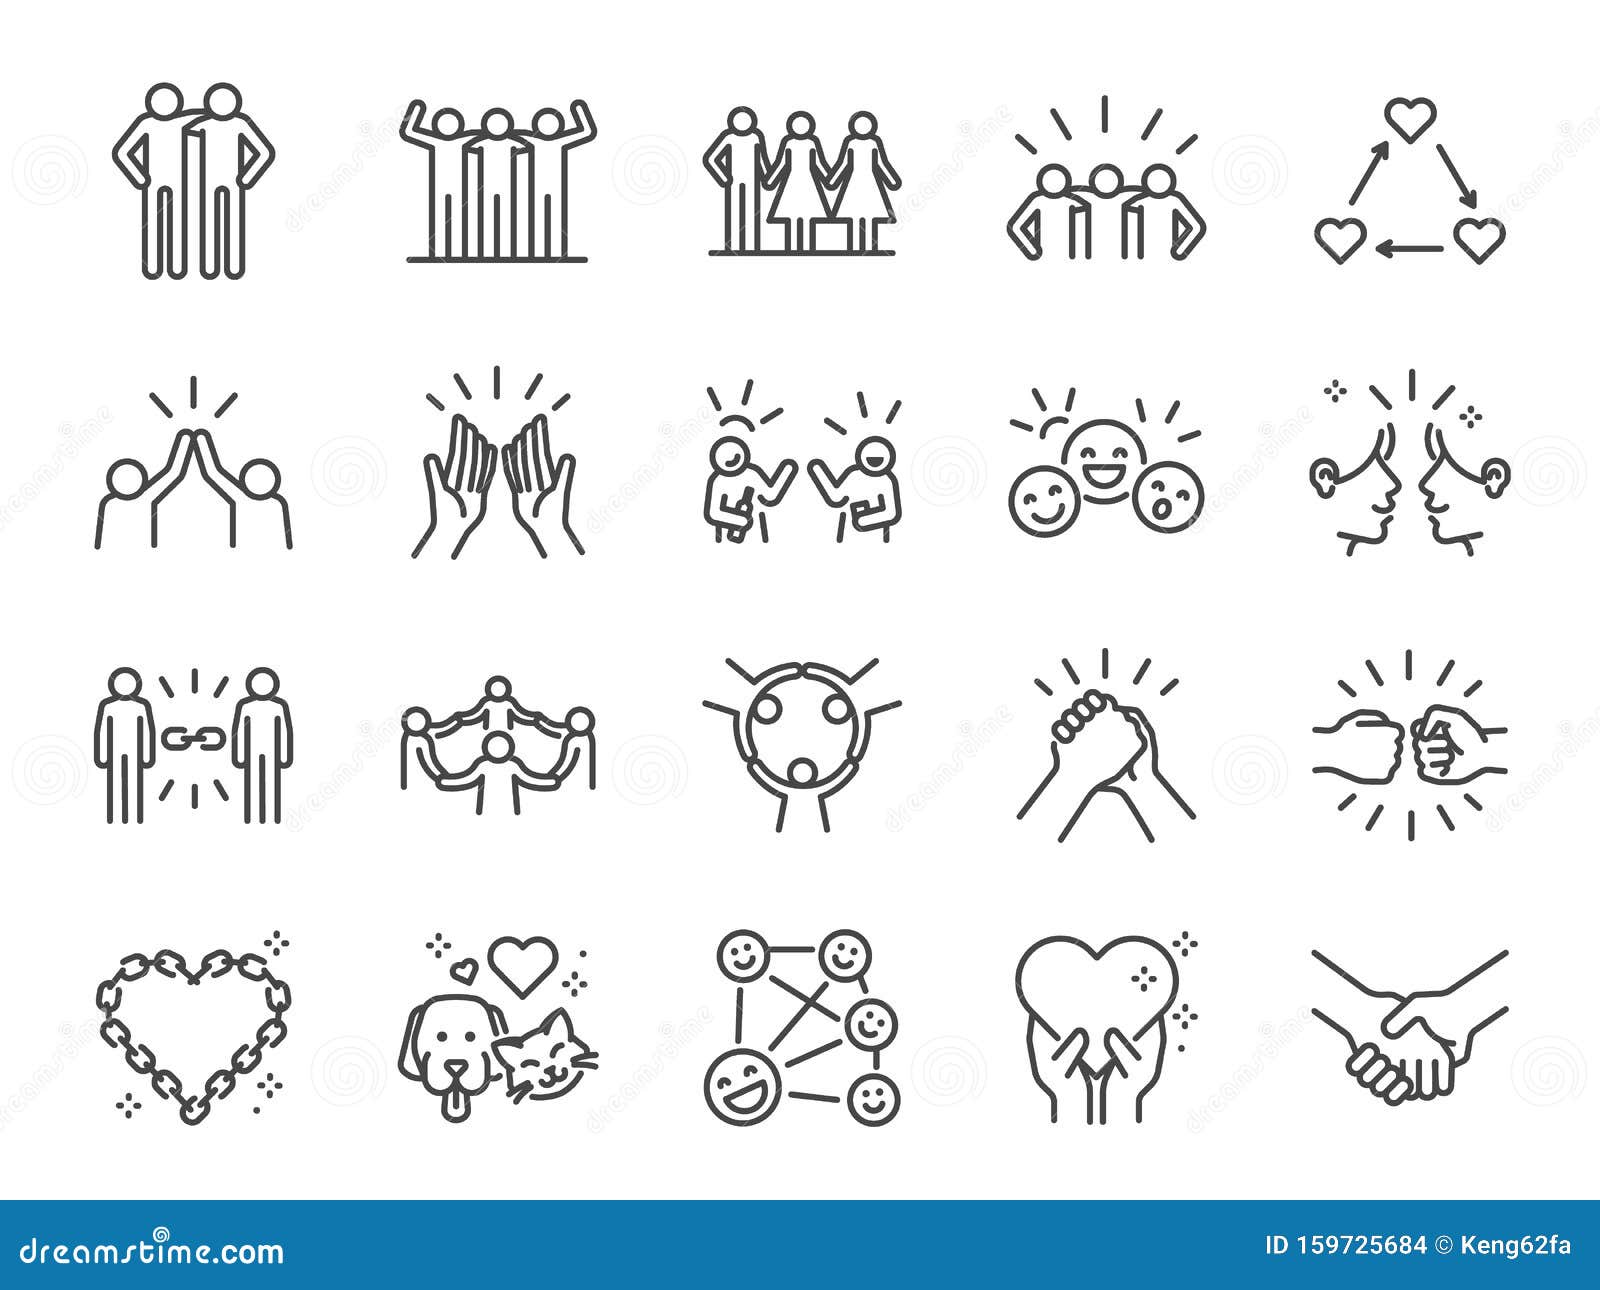 friendship line icon set. included icons as friend, relationship,ÃÂ buddy, greeting, love, care and more.